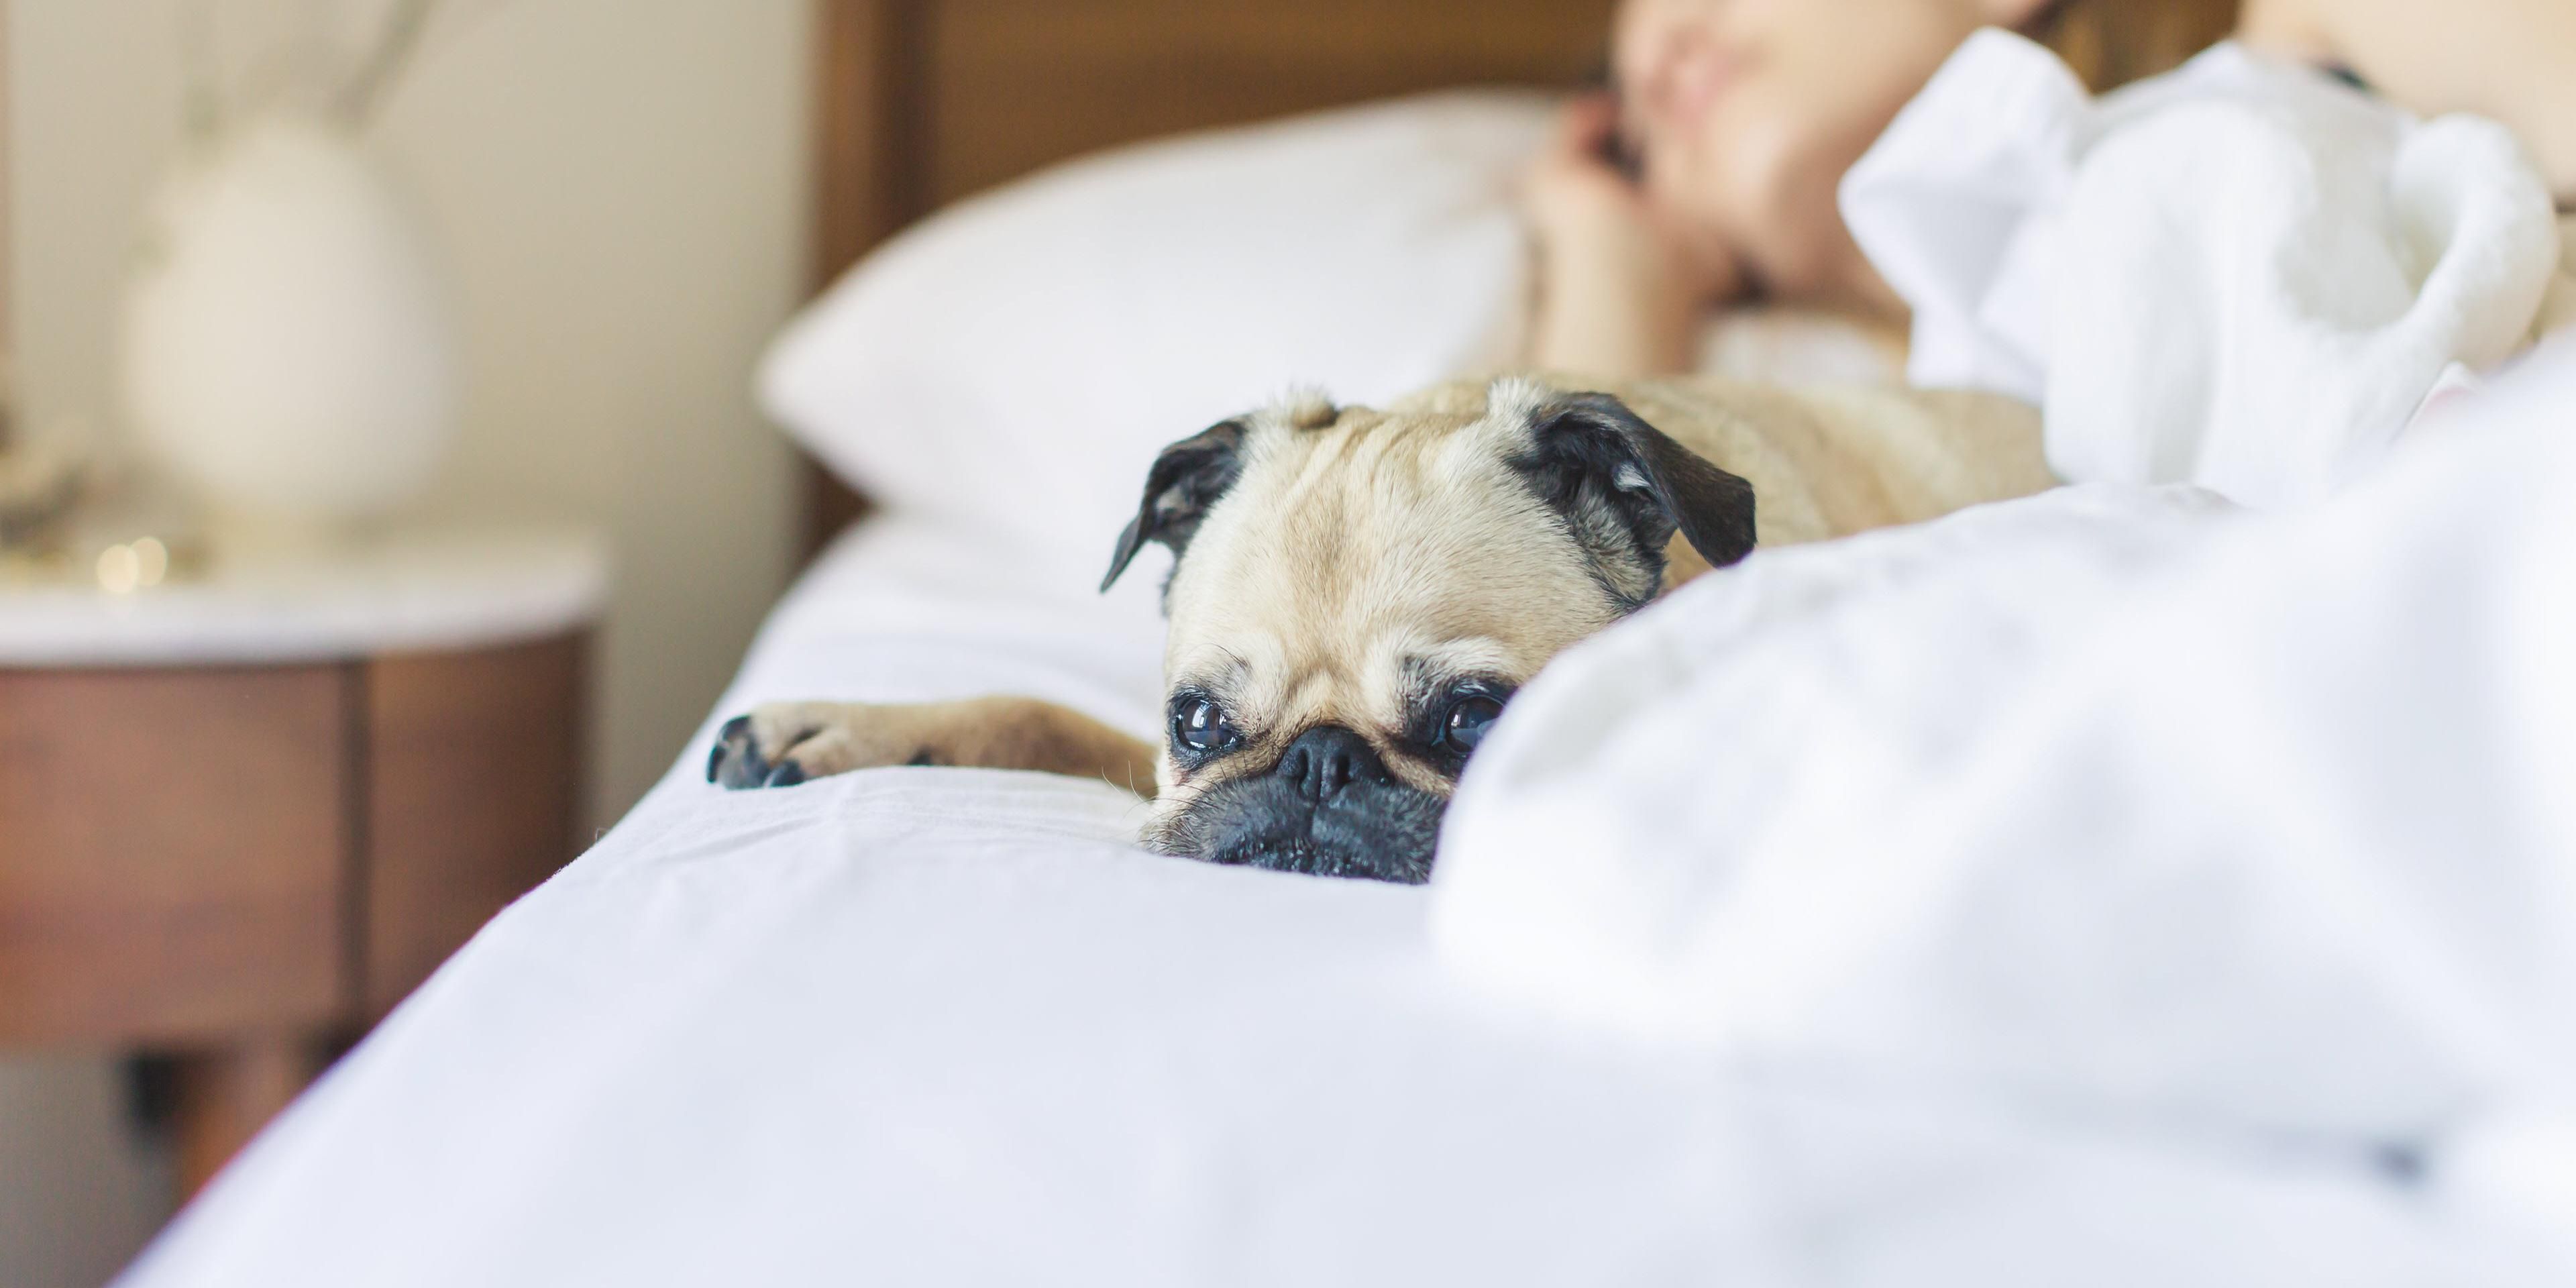 Is your travel experience enriched when you bring your four-legged friend? We have space for you and your furry friend. Our pet-friendly policy is 50 dollars per night with a maximum of 2 pets per room. Please call the hotel directly for additional questions. 